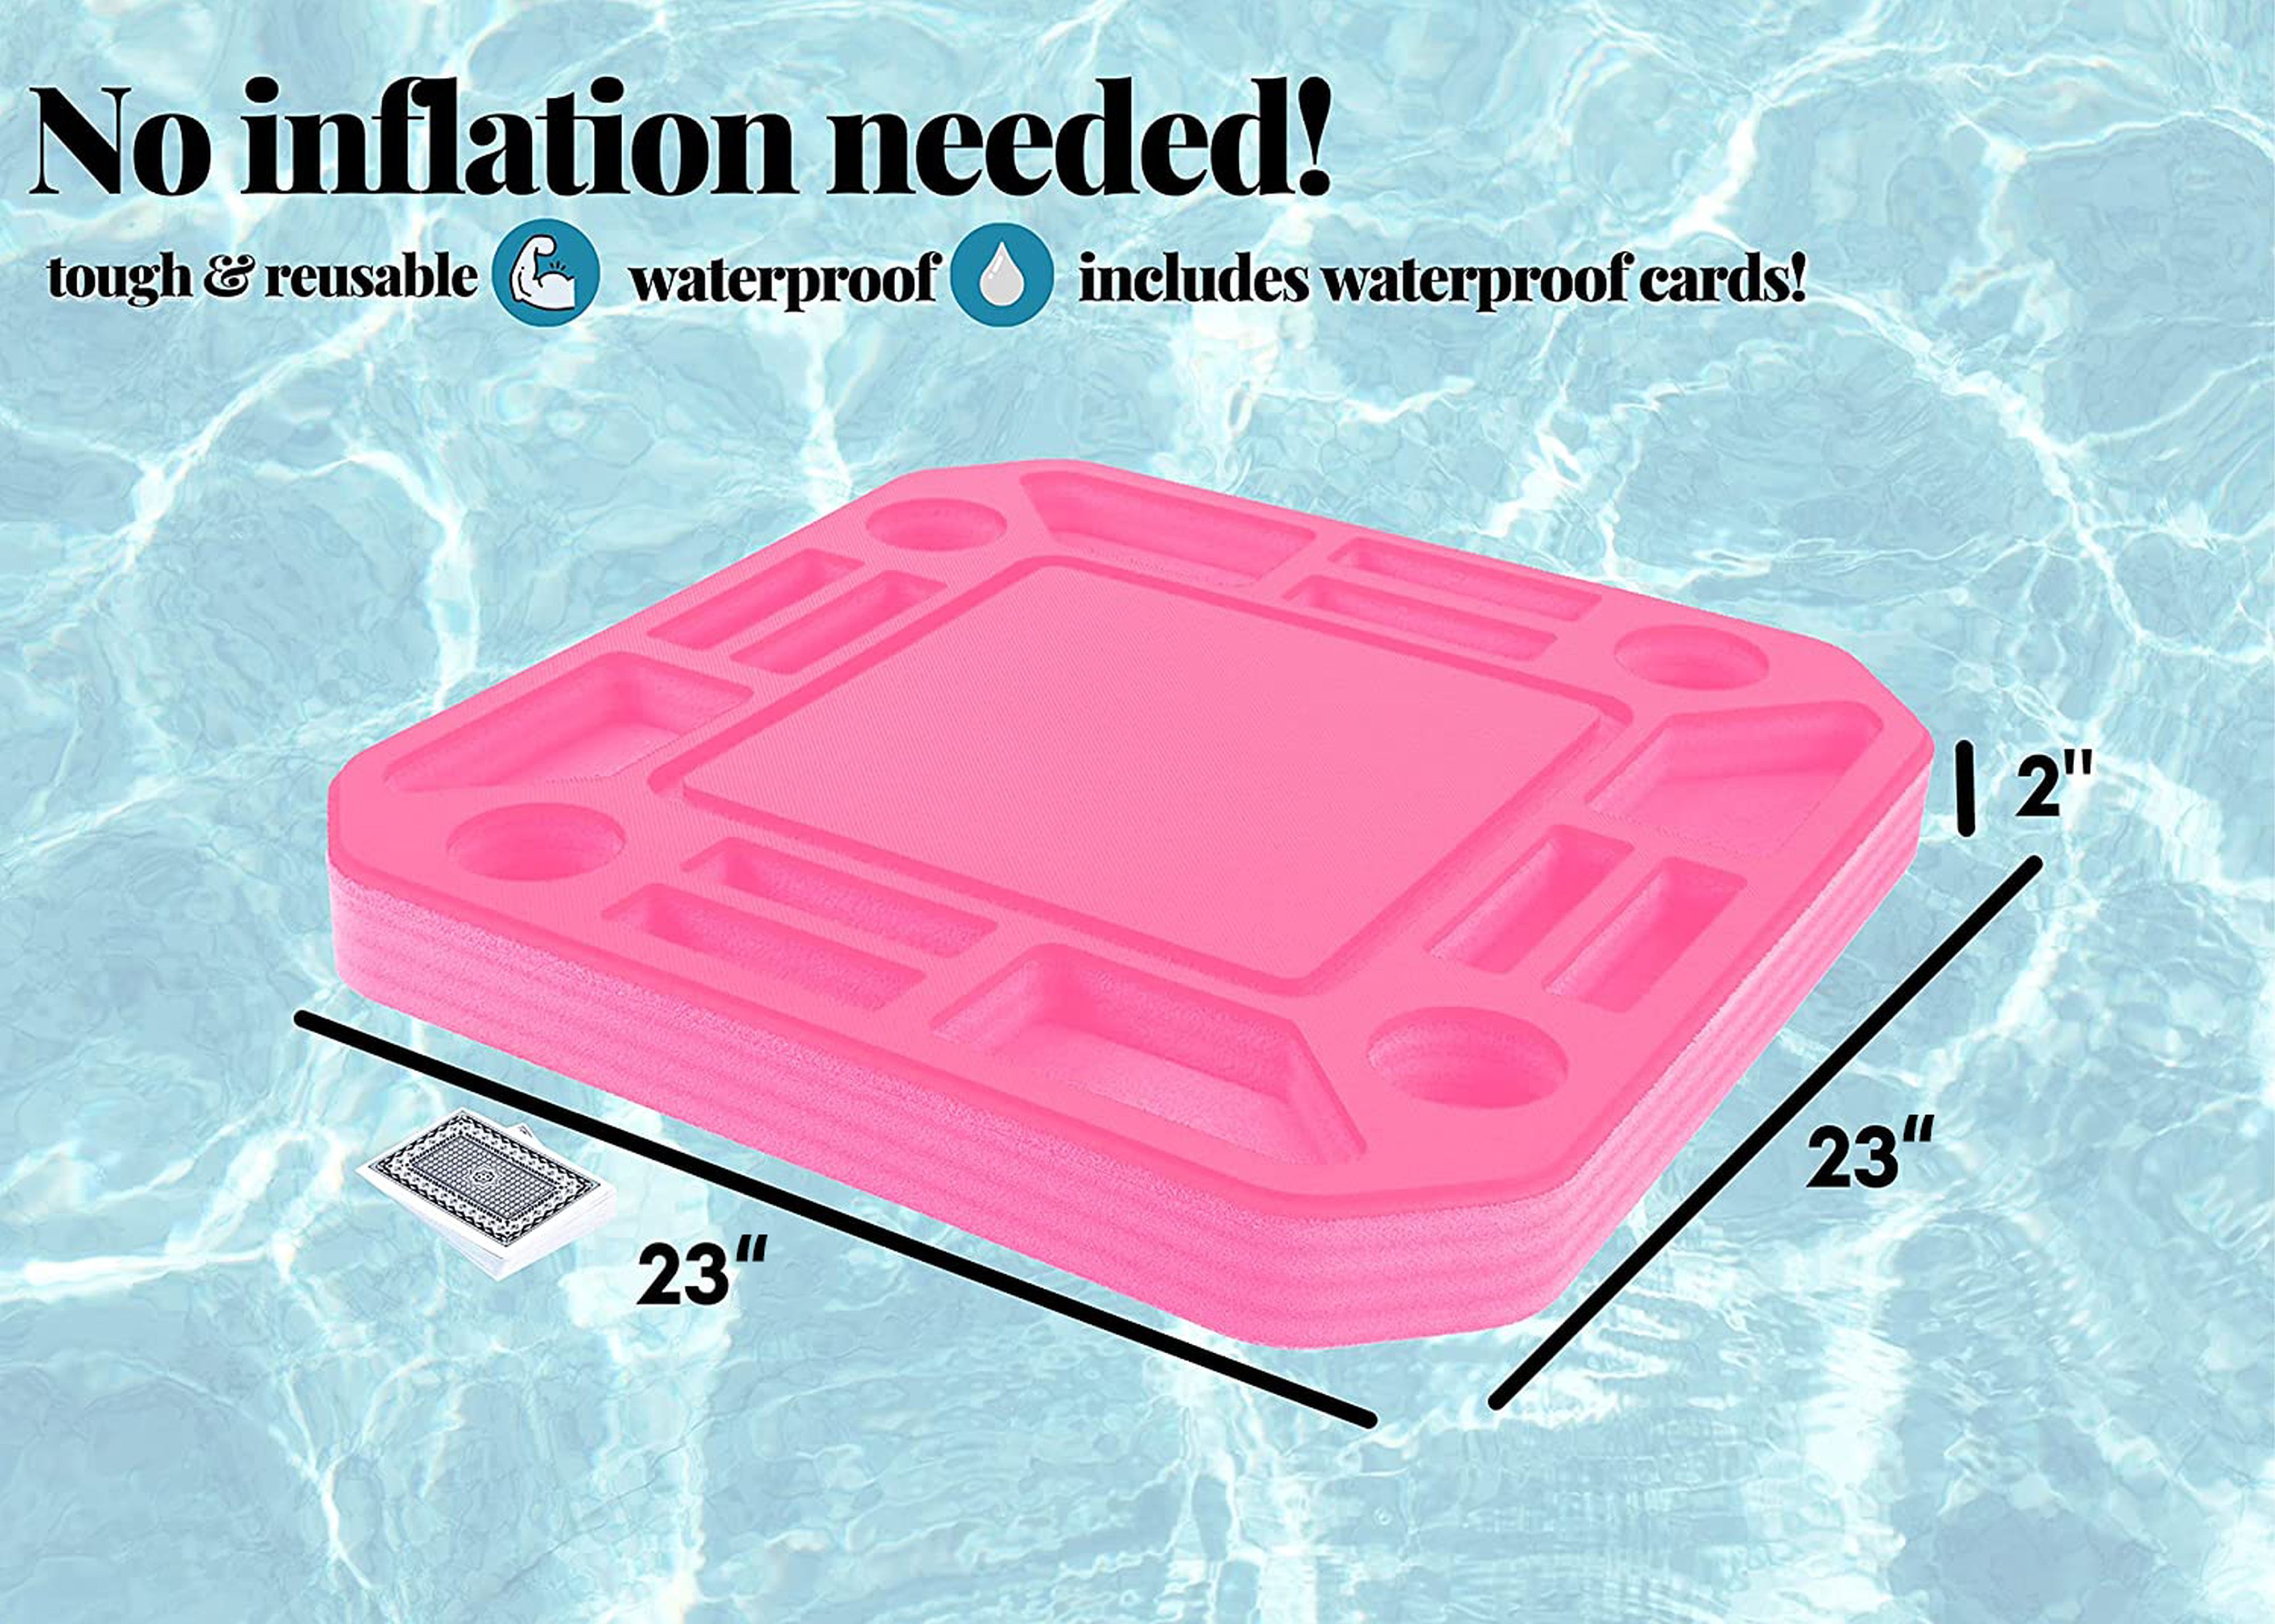 Floating Poker Table Pink Game Tray for Pool Beach Party Float Lounge Durable Foam 23 Inch Chip Slots Drink Holders Deck